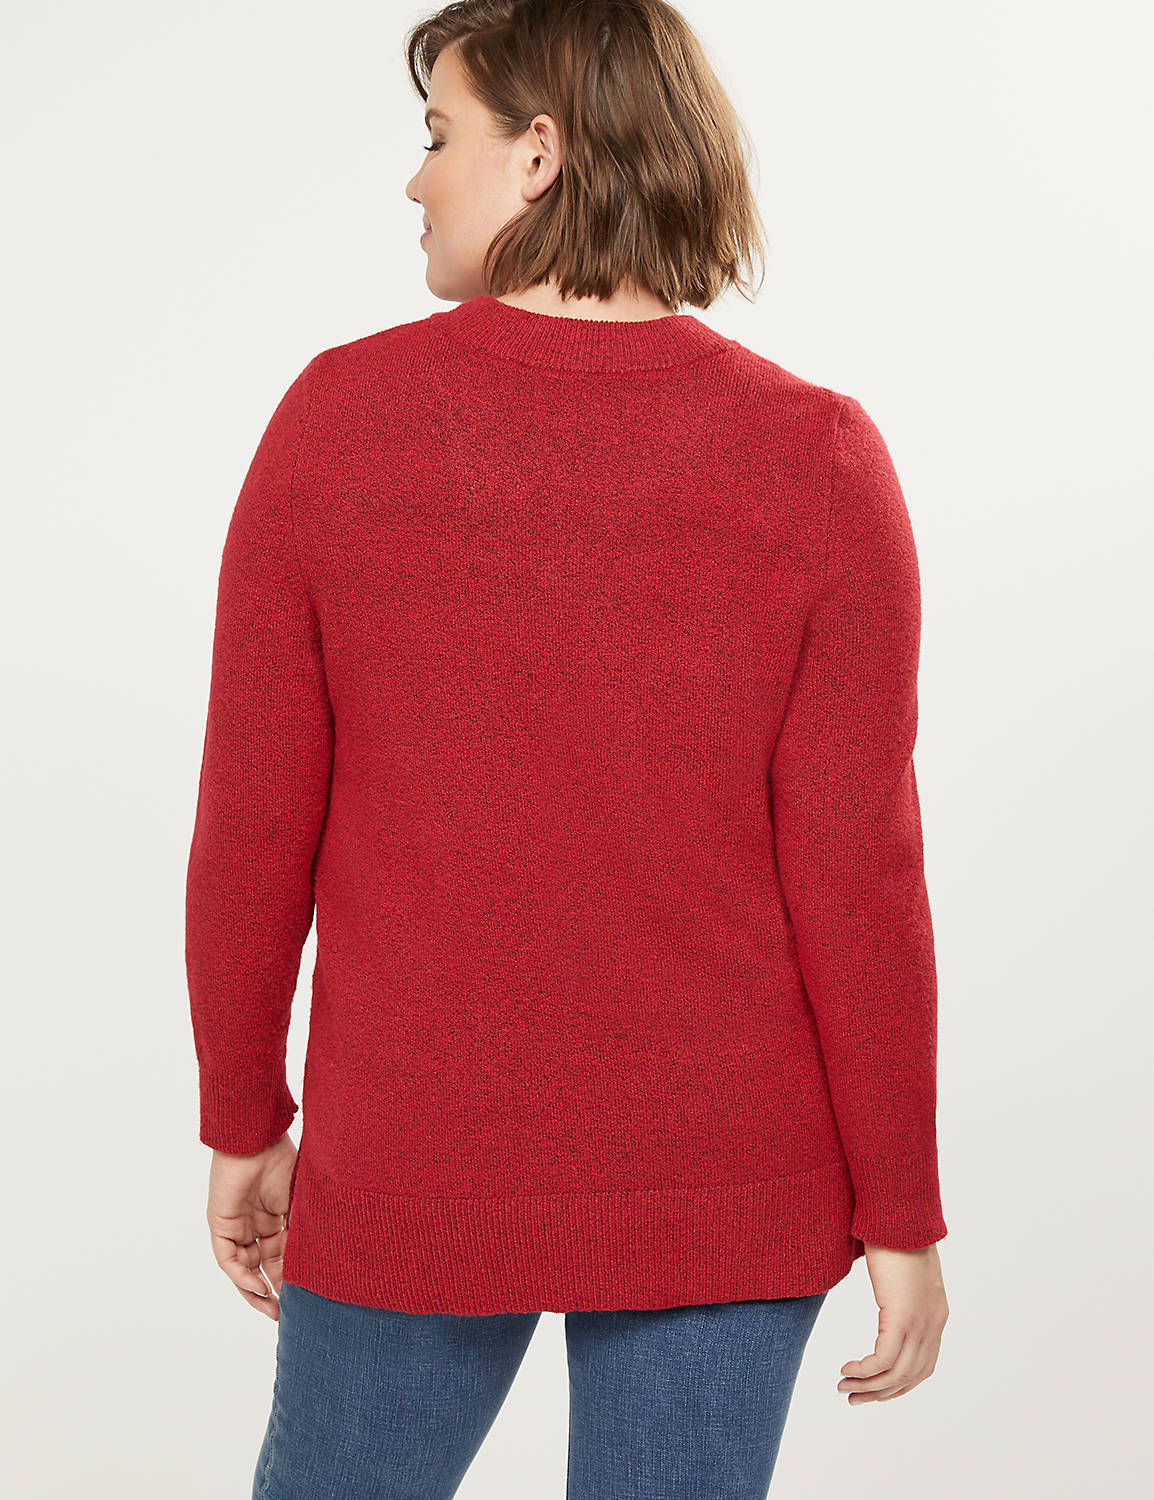 1108693 Pullover Vneck Sweater:Venetian Red CSI 0300944:22/24 Product Image 2